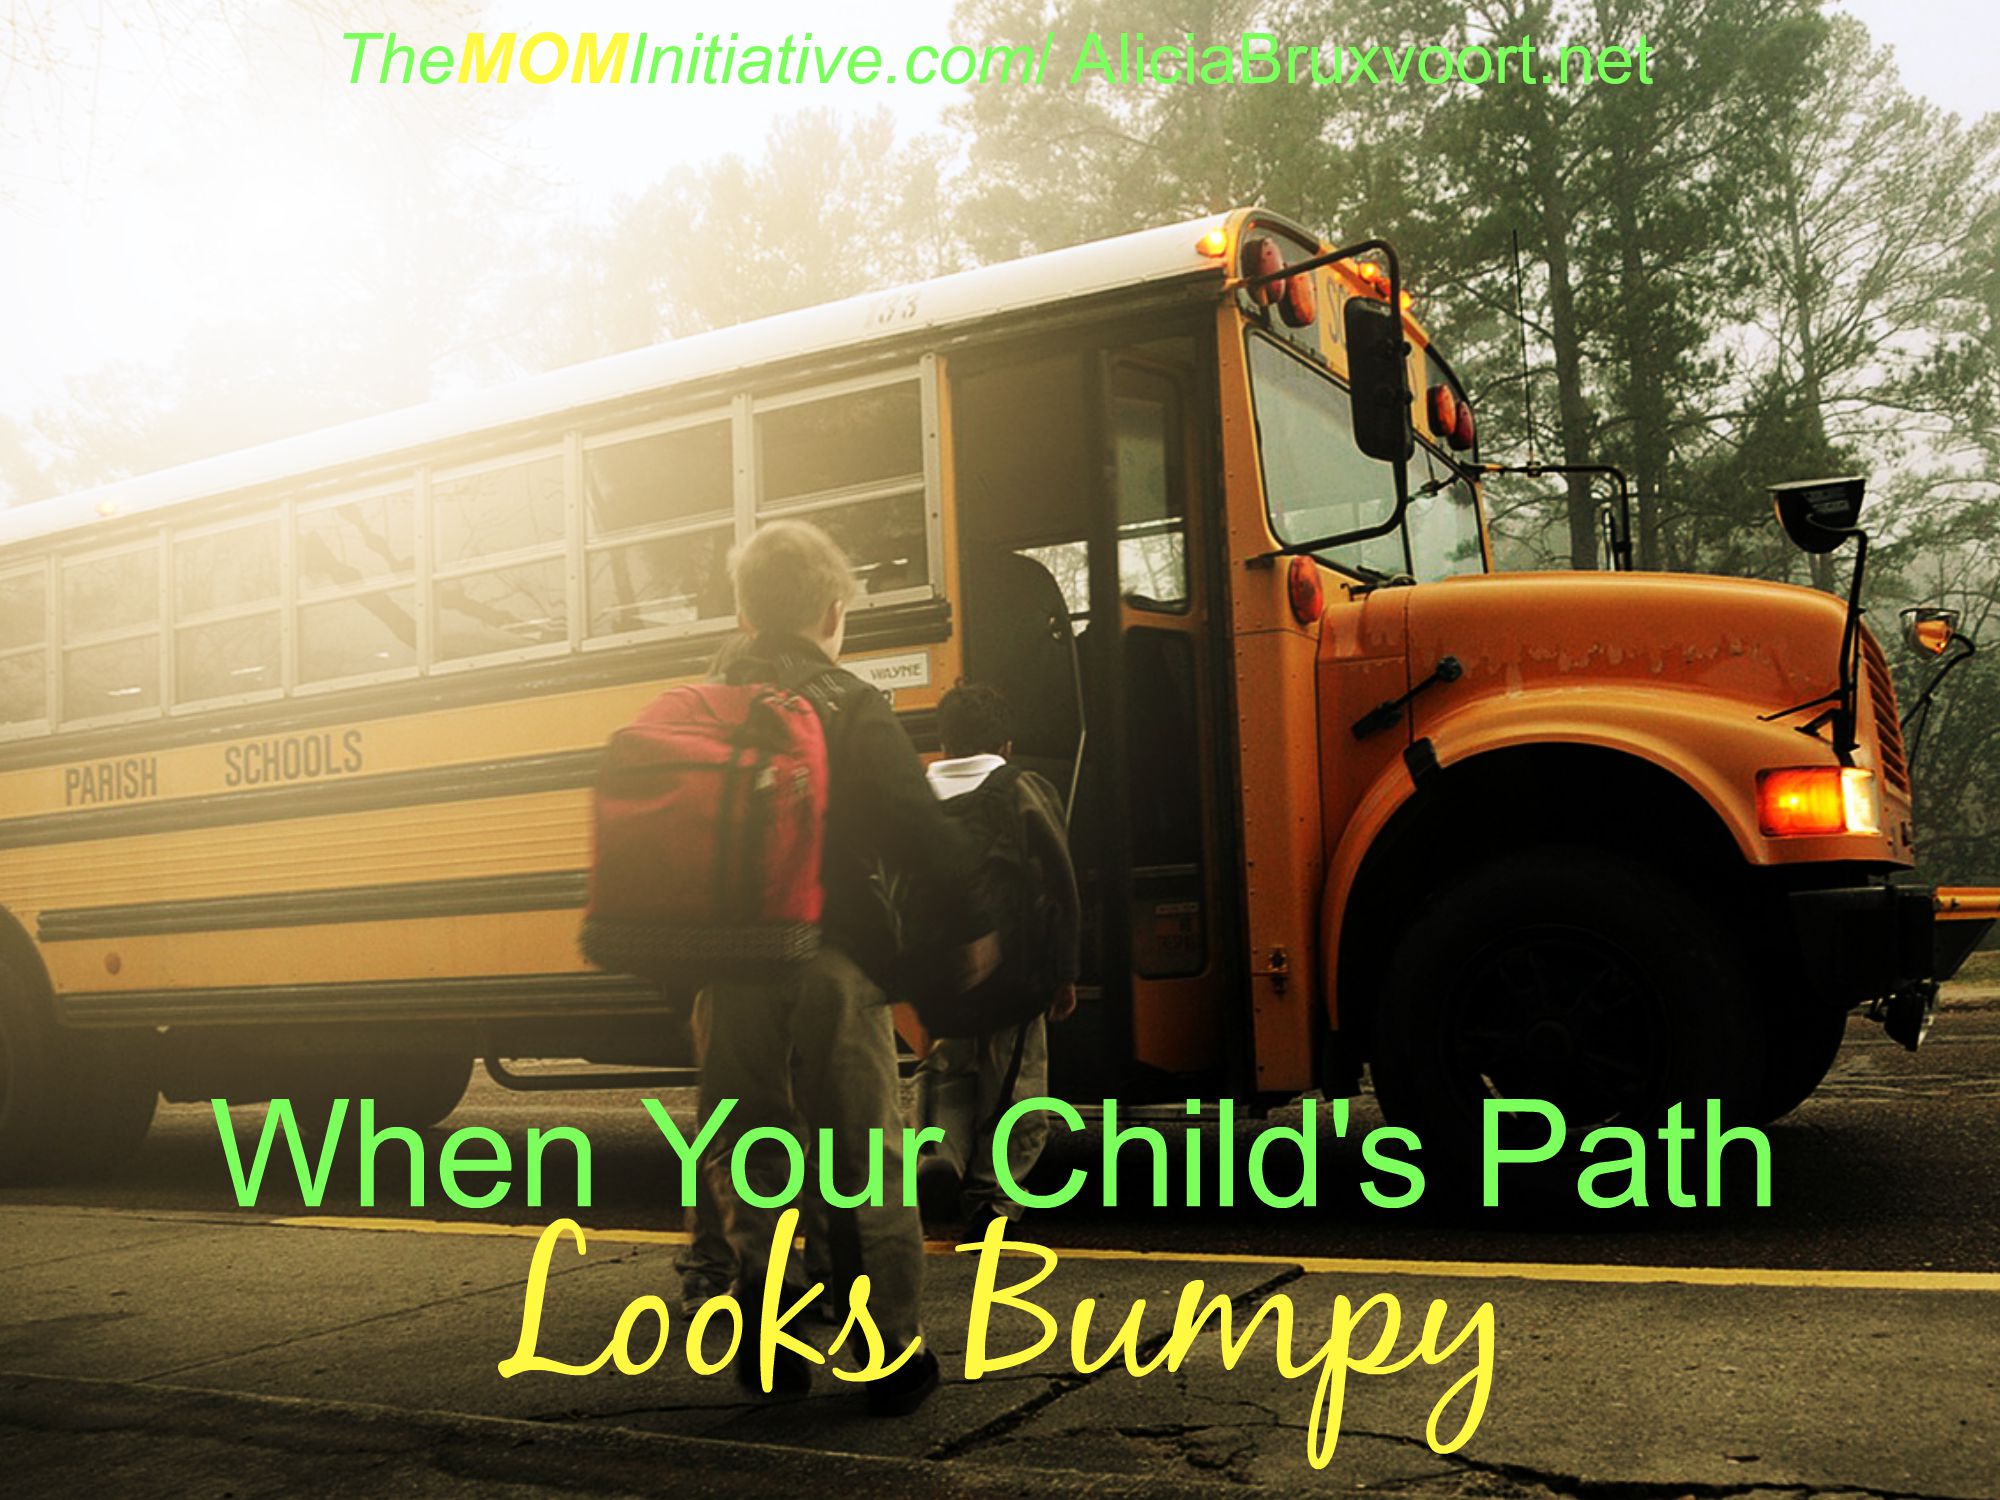 The Mom Initiative: When Your Child’s Path Looks Bumpy